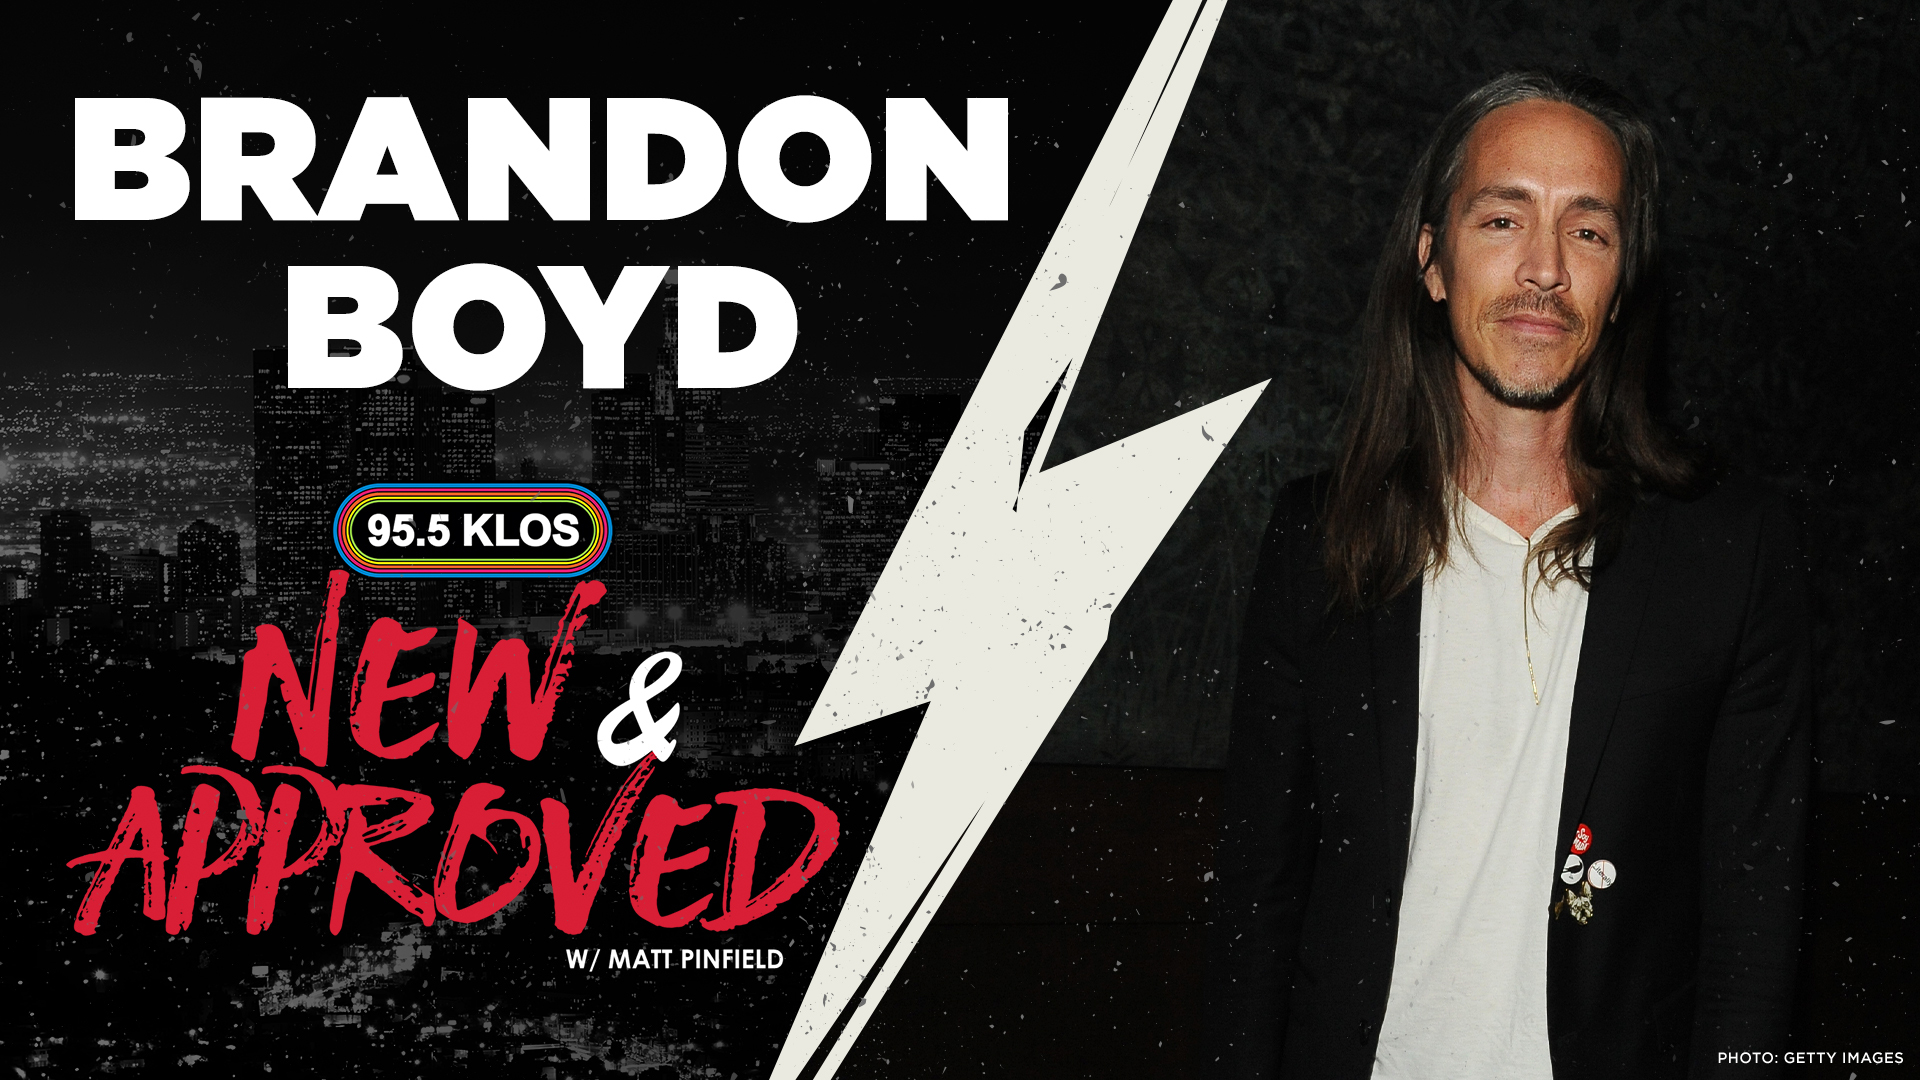 Brandon Boyd Discusses New Solo Record And Writing Inspirations With Matt Pinfield On New & Approved